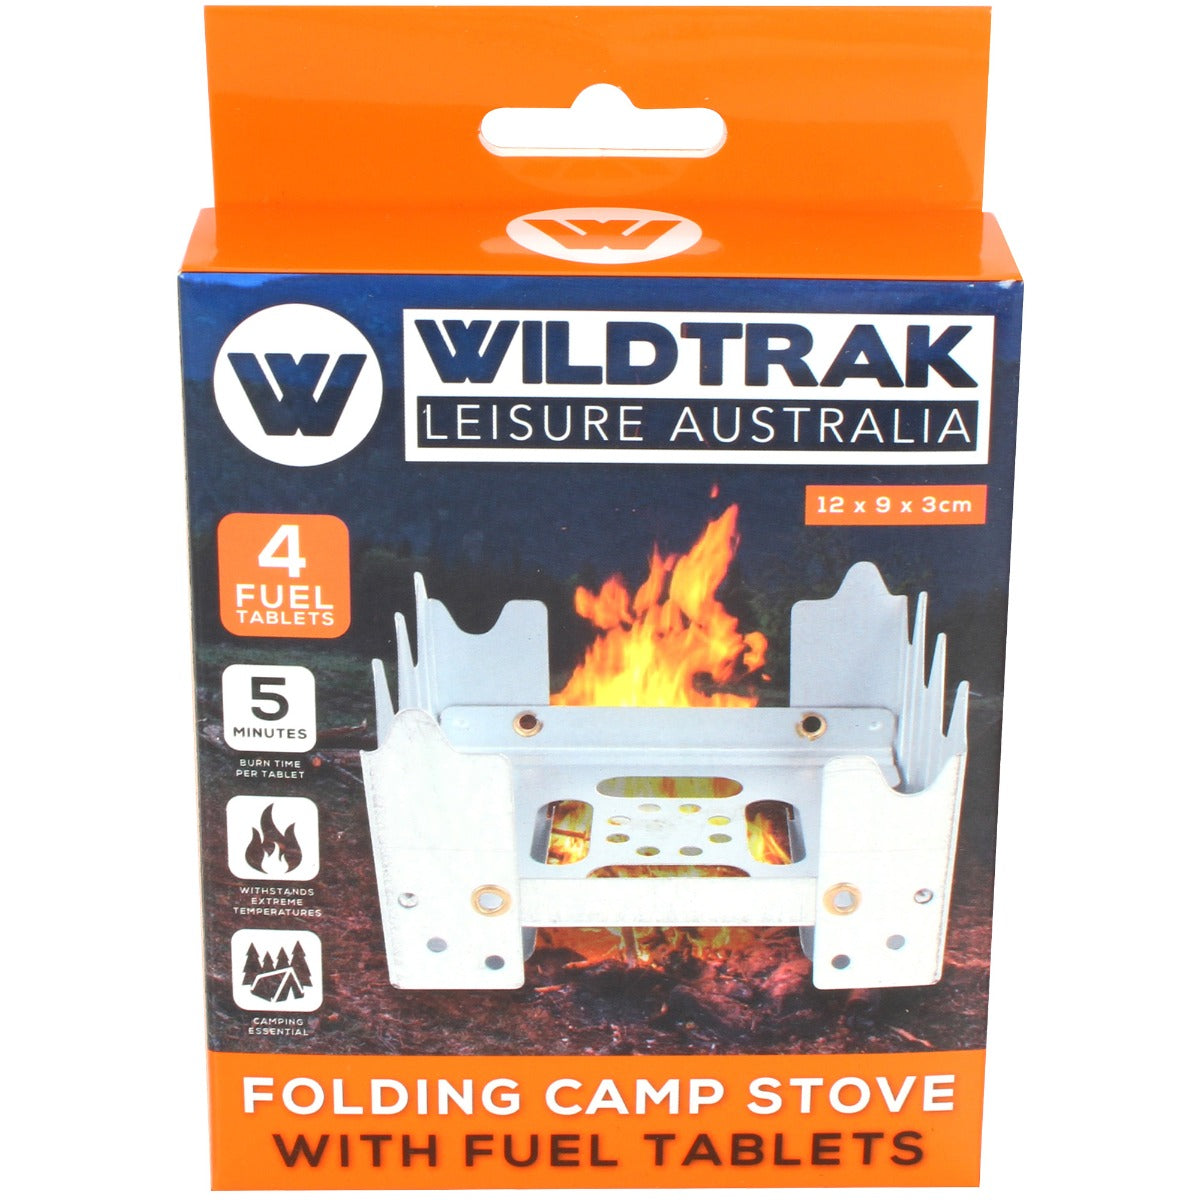 FOLDING CAMP STOVE WITH FUEL TABLETS